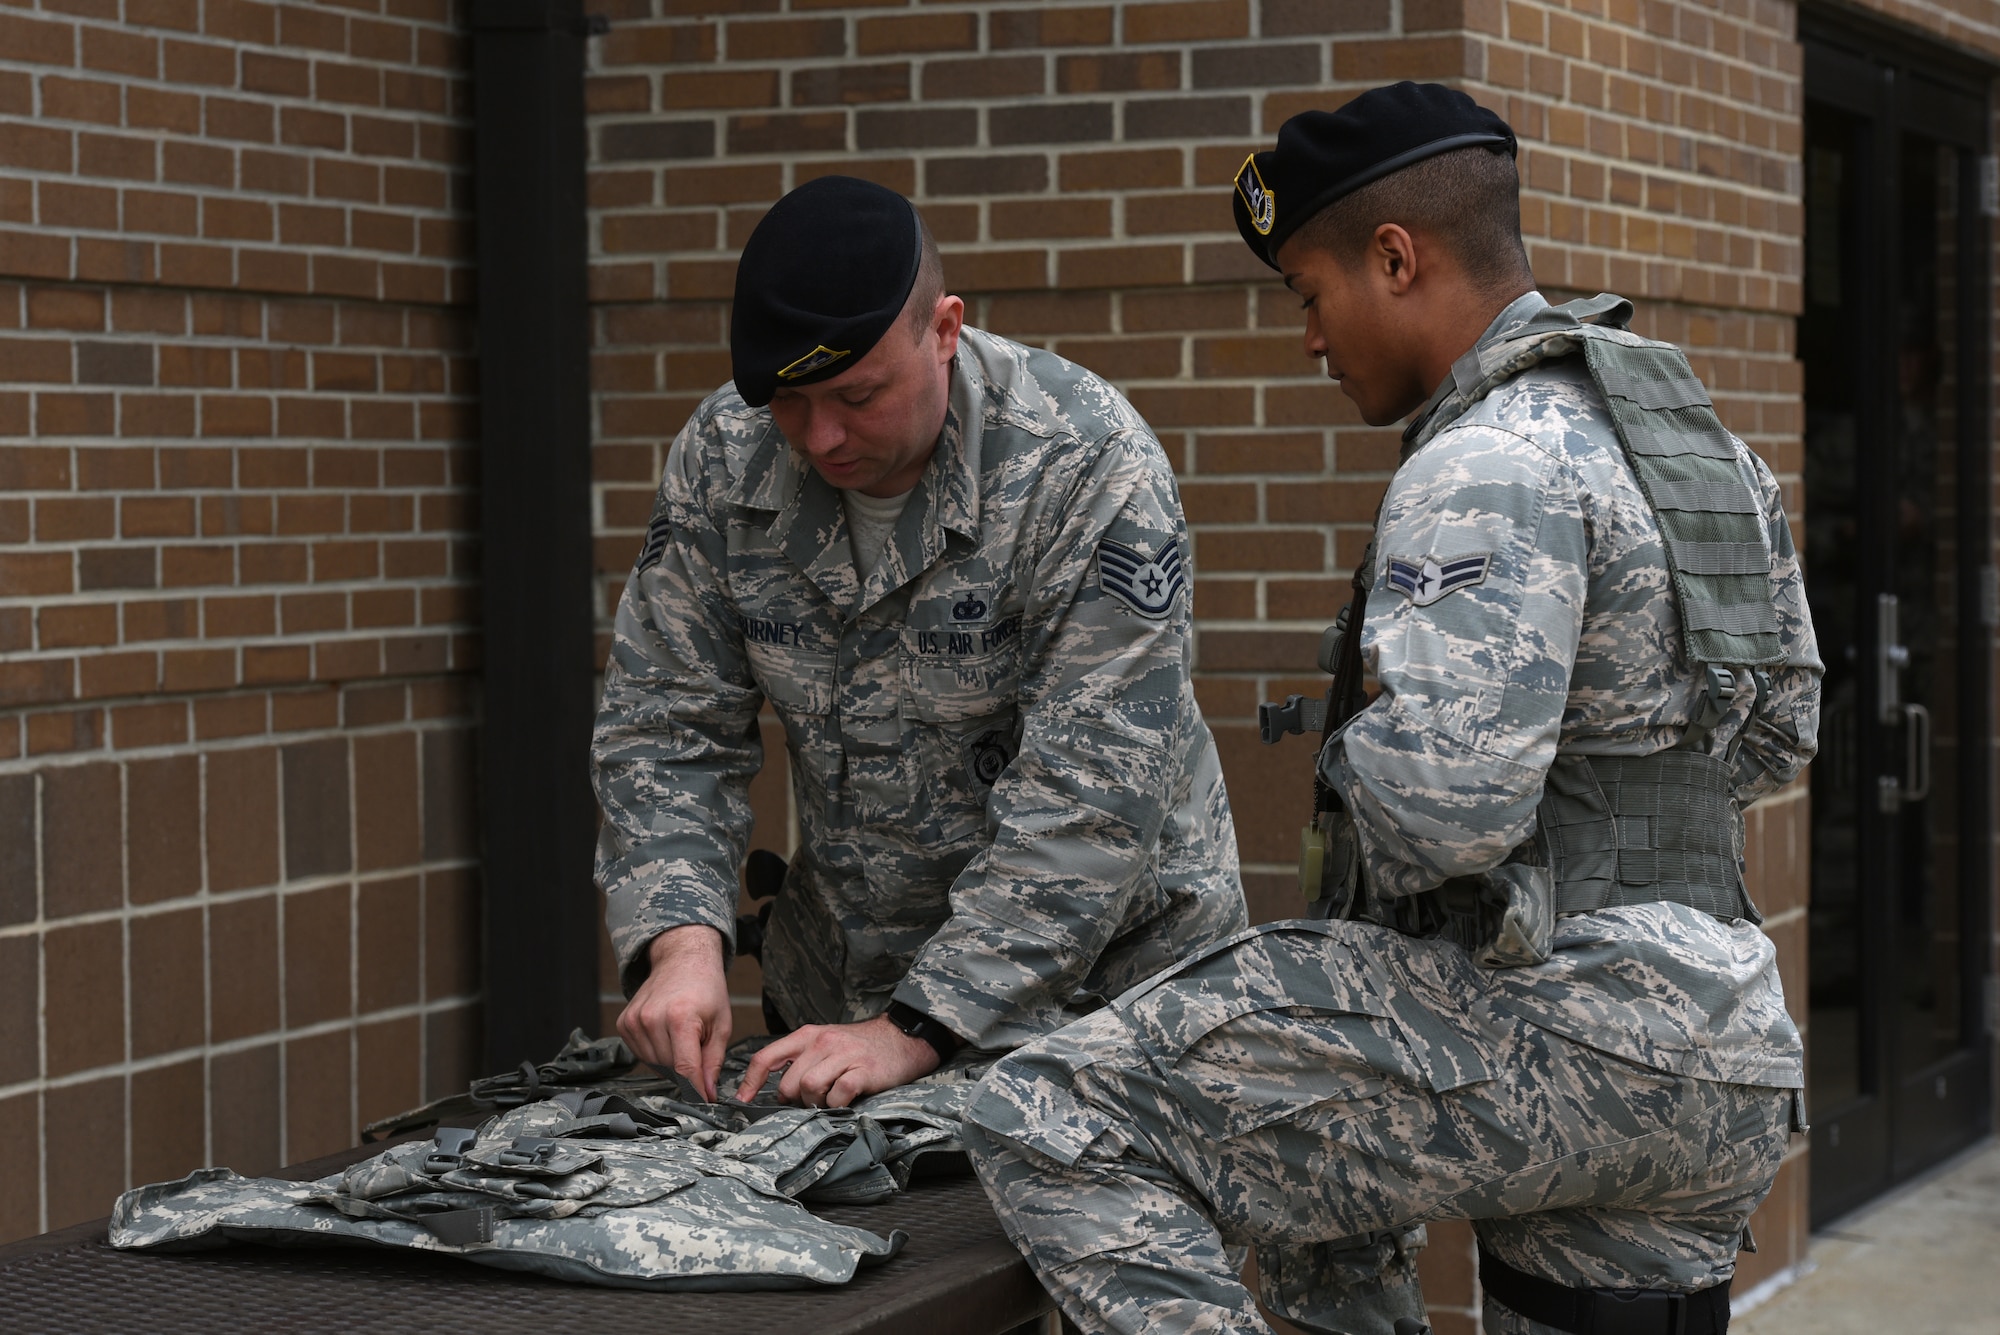 U.S. Air Force Airmen assigned to the 20th Security Forces Squadron prepare equipment before an active shooter exercise at Shaw Air Force Base, S.C., Feb. 28, 2018.